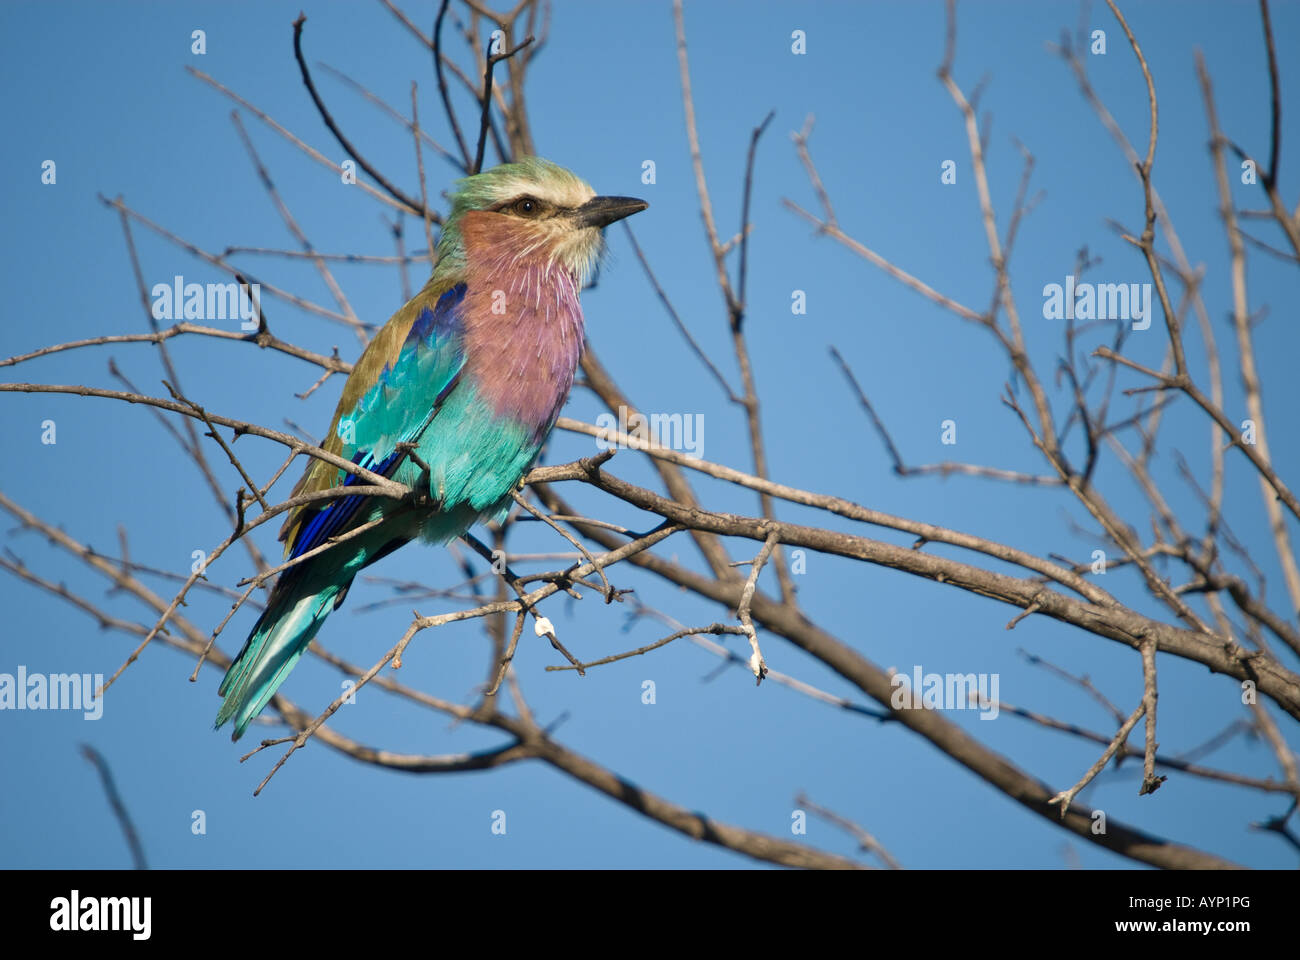 A lilac-breasted roller perched on a branch Stock Photo